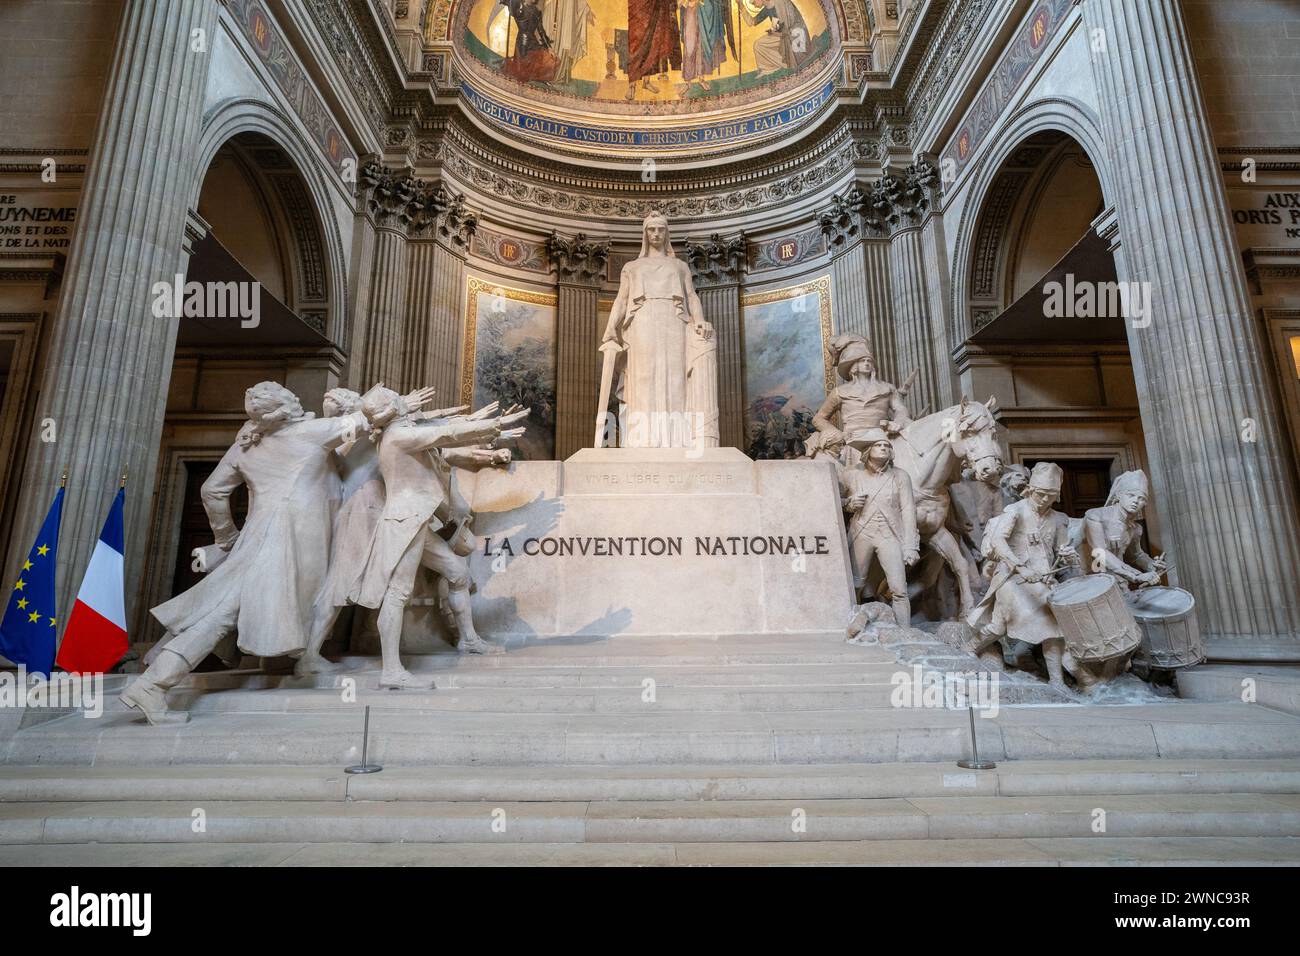 The sculpture group represents the National Convention (La Convention Nationale), the French Revolution's constitutional and legislative assembly. Stock Photo